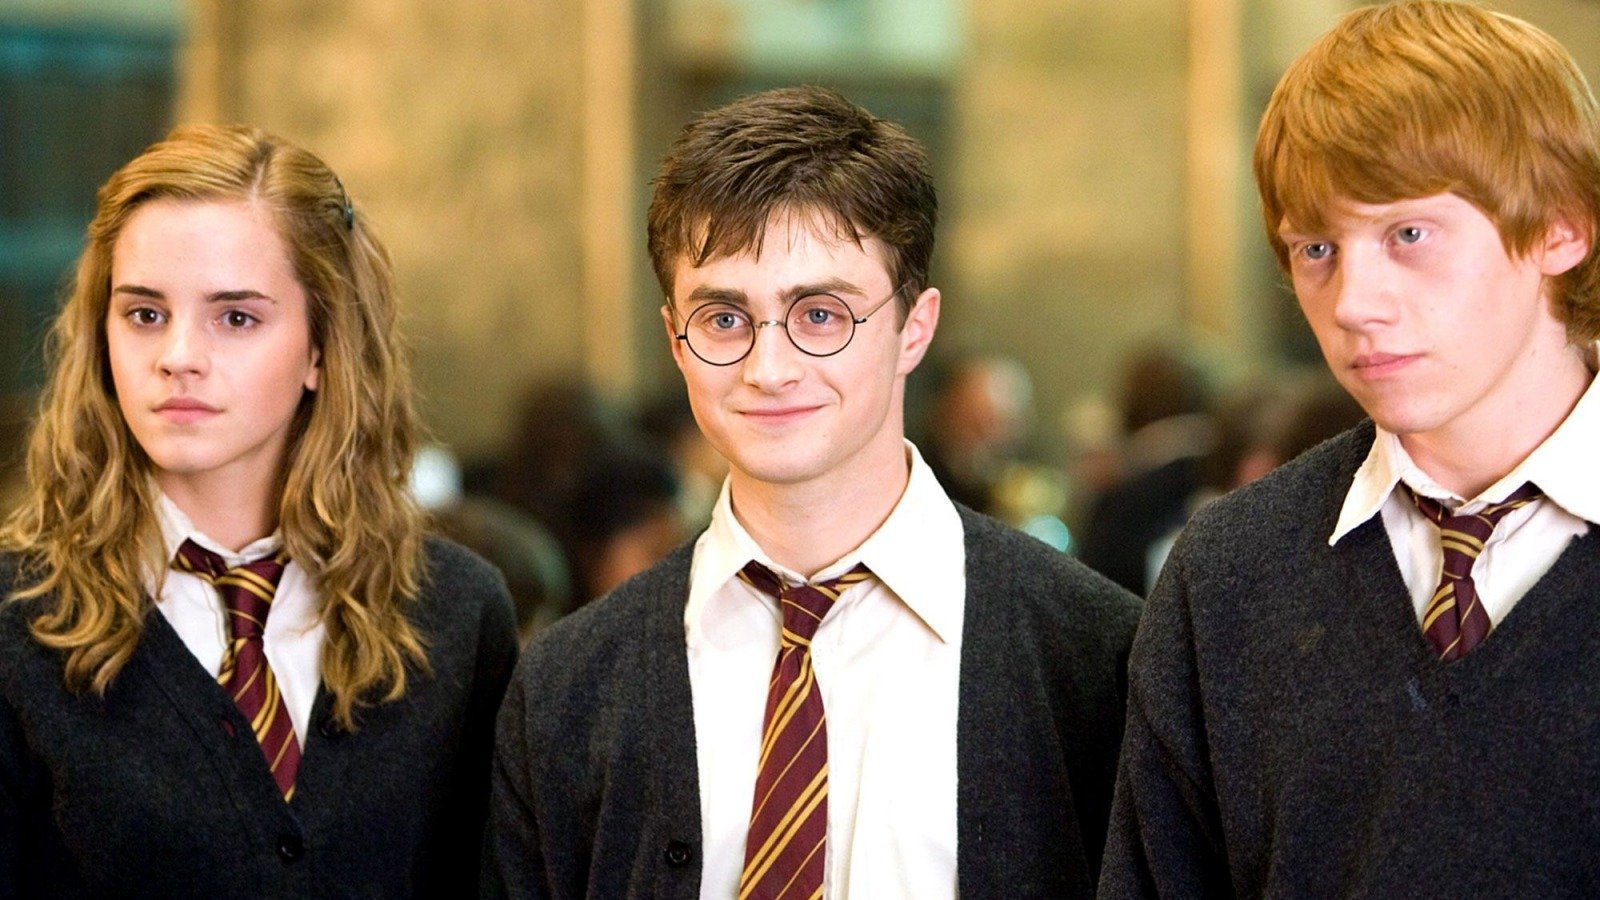 Differences Between The Harry Potter Books And Films That Got Fans Talking